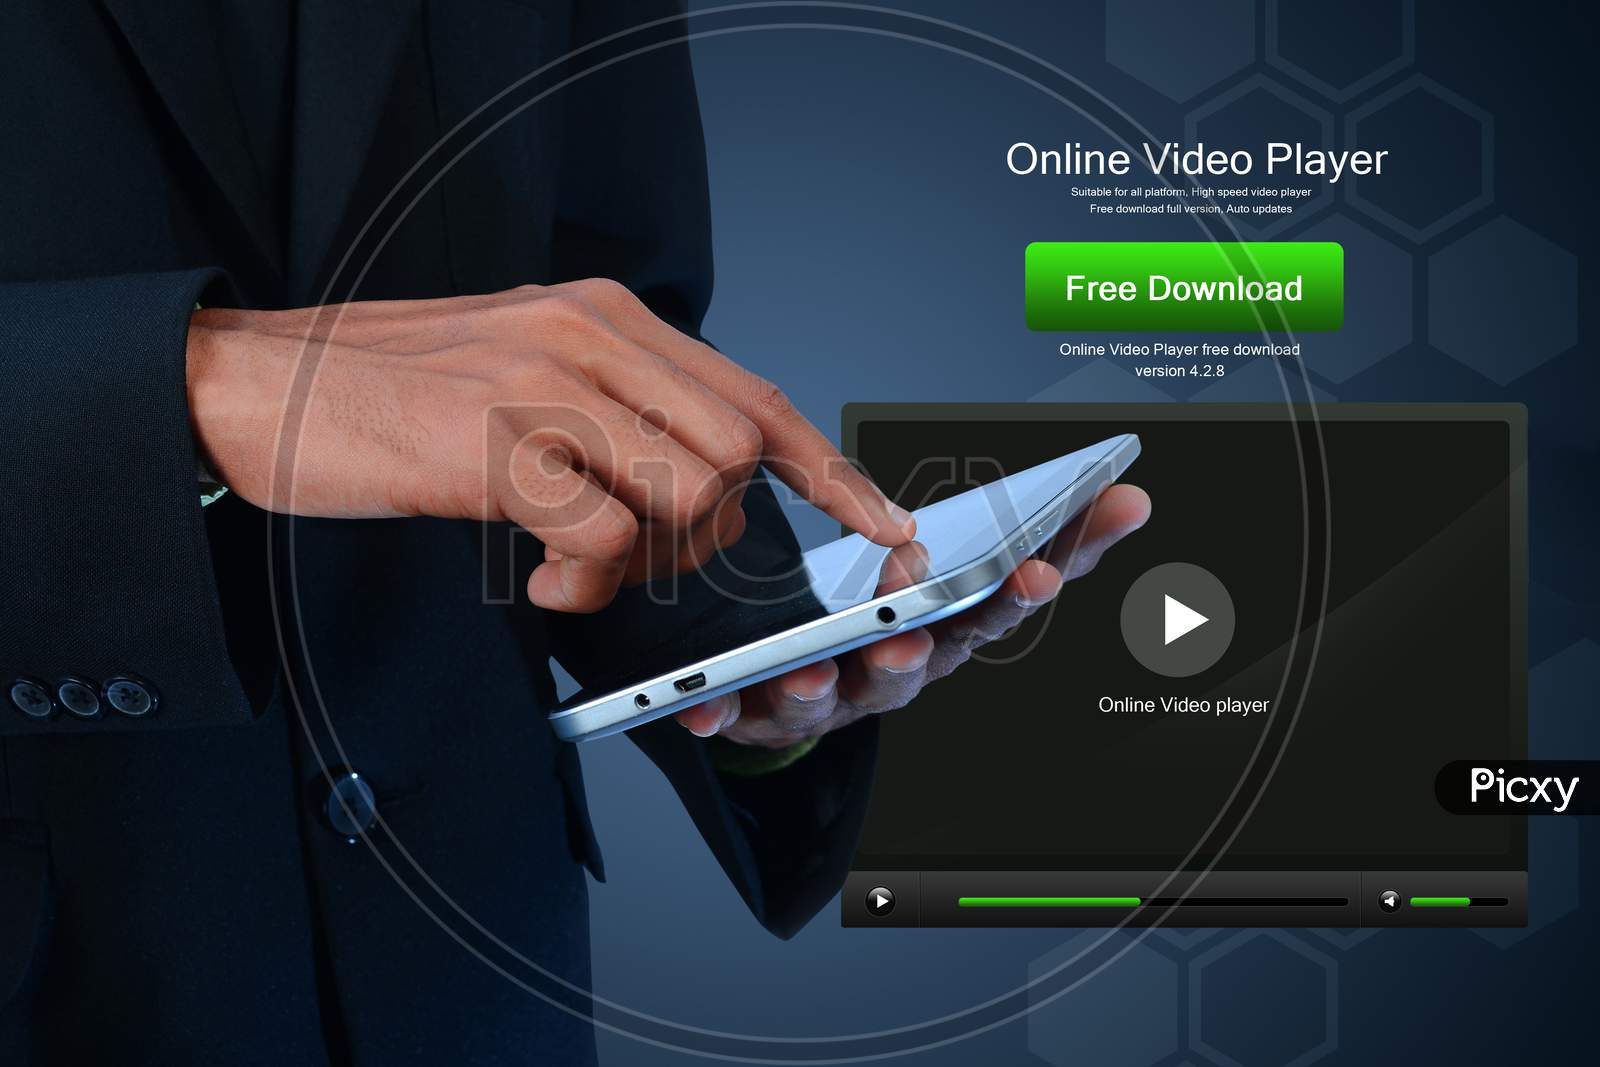 Close up shot of Person's Hand using a tablet or iPad with Online Video Player in the background